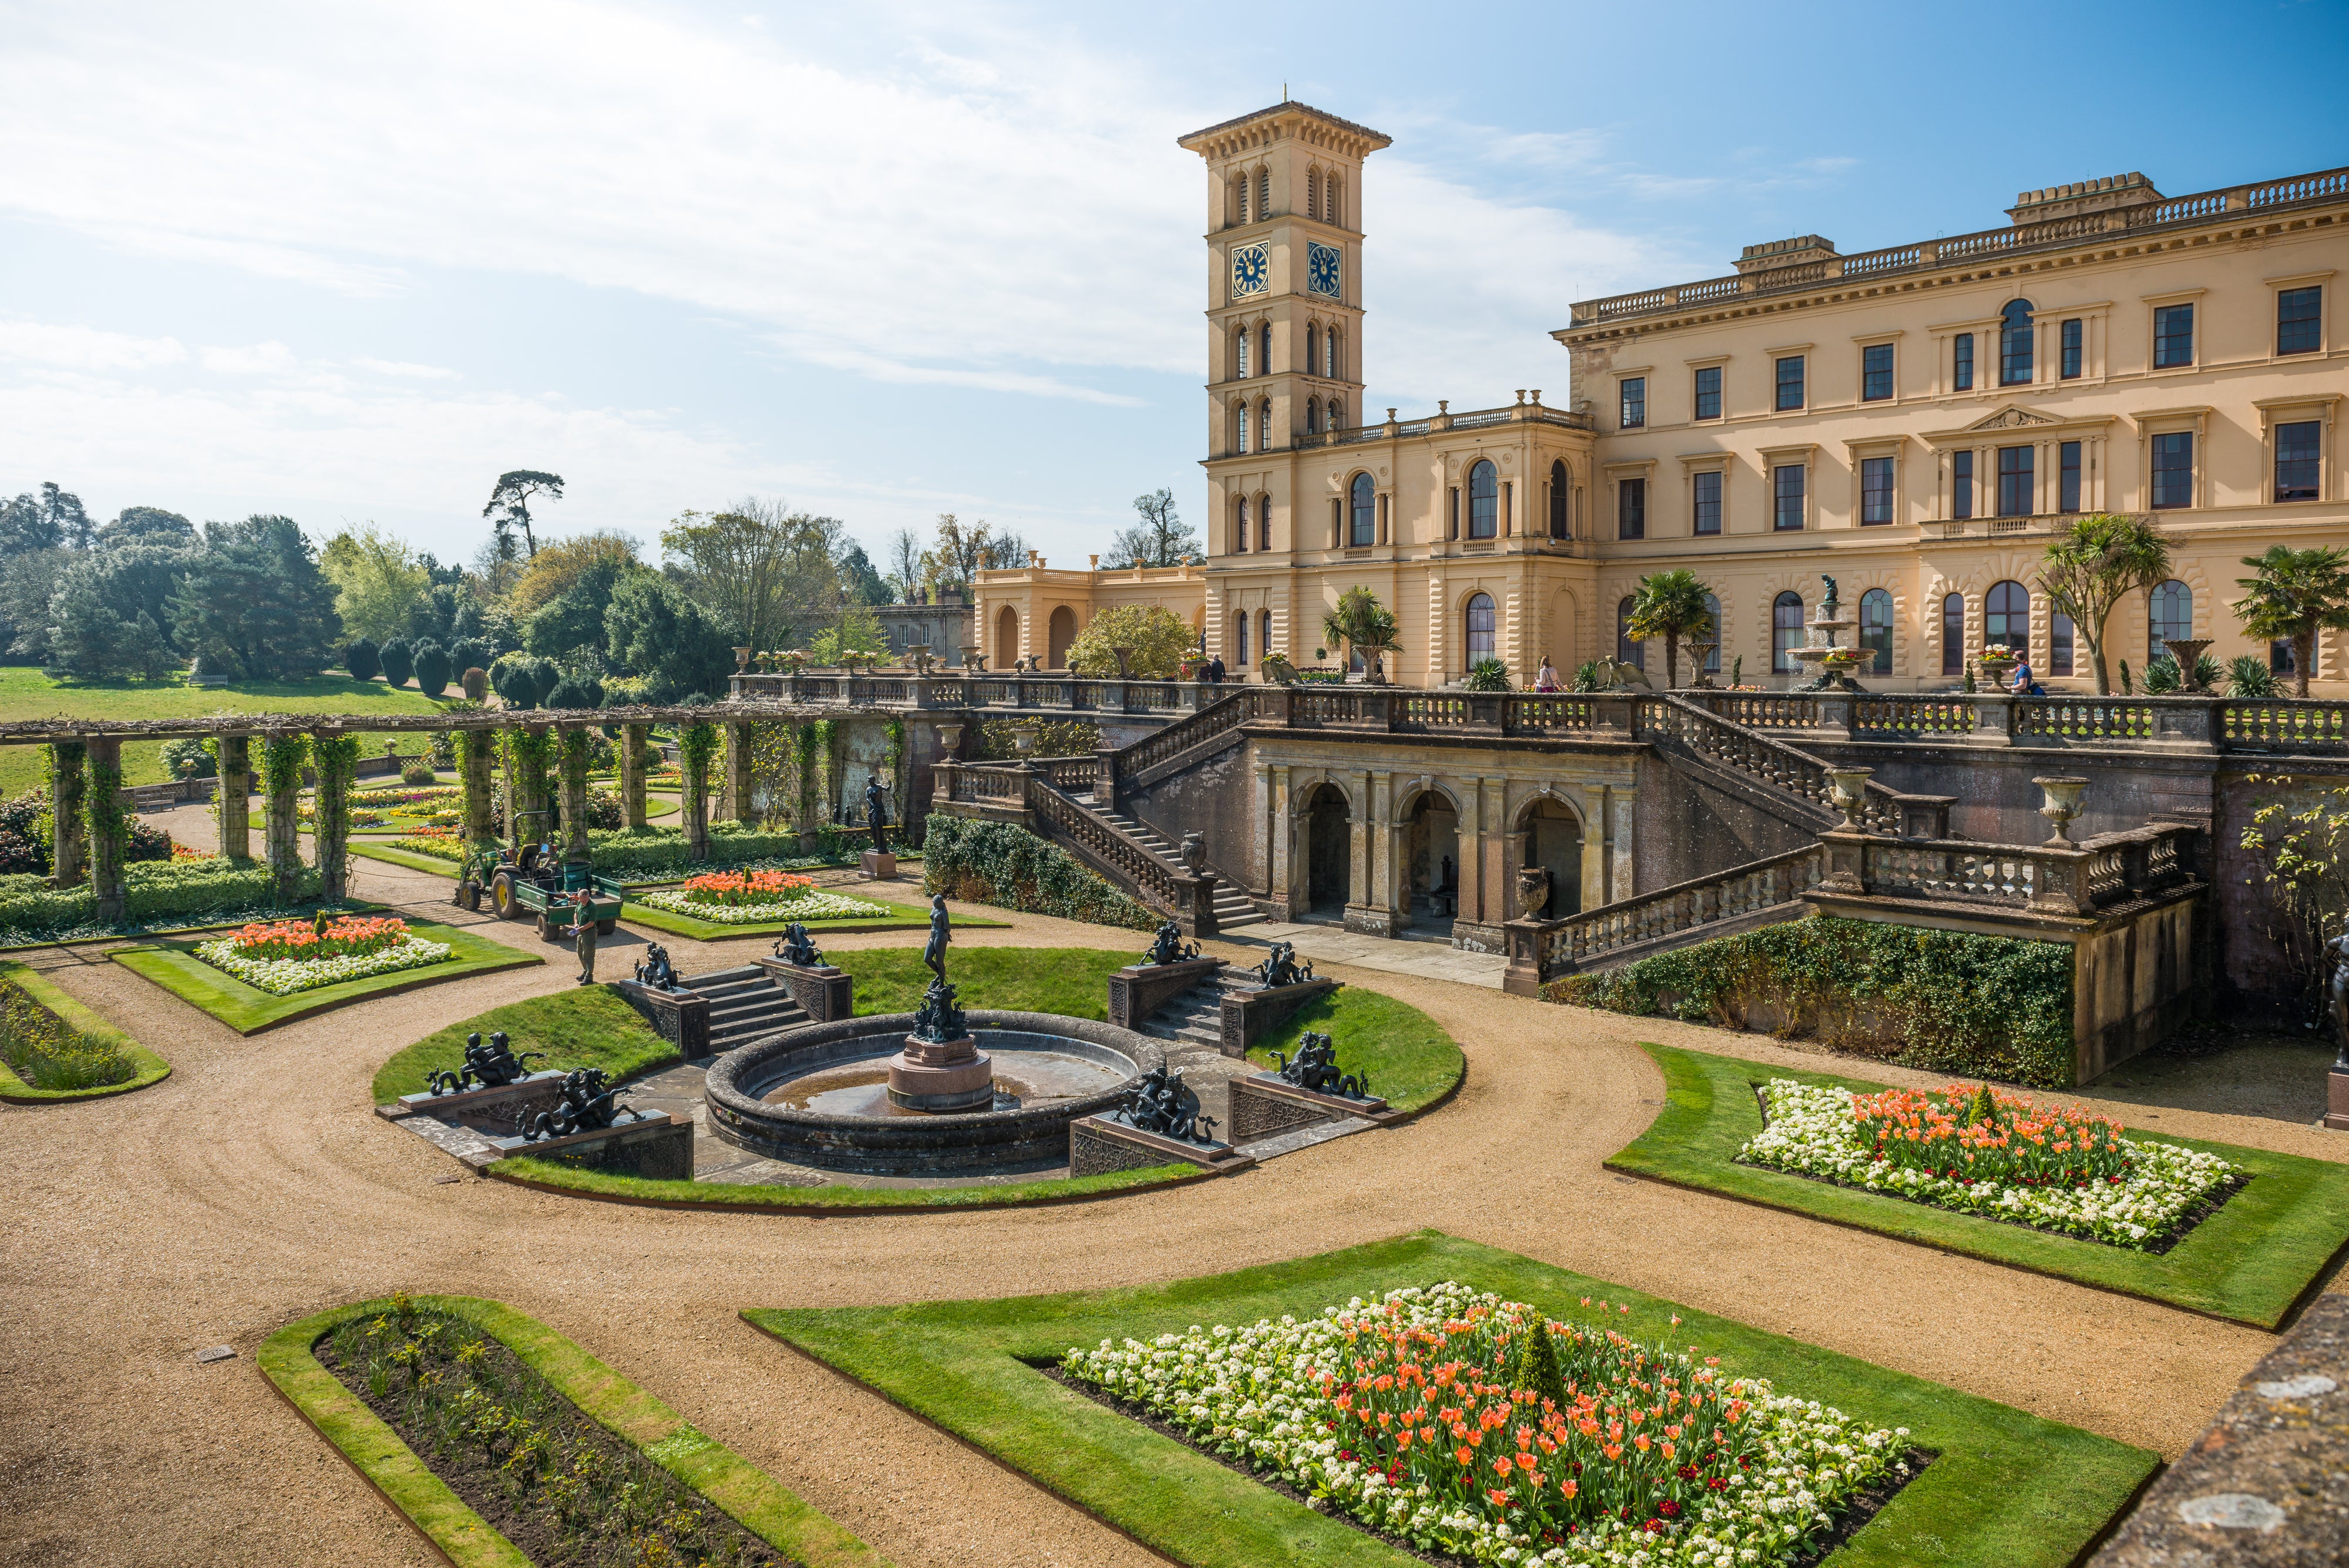 Around Our Shores: Osborne House, Isle of Wight